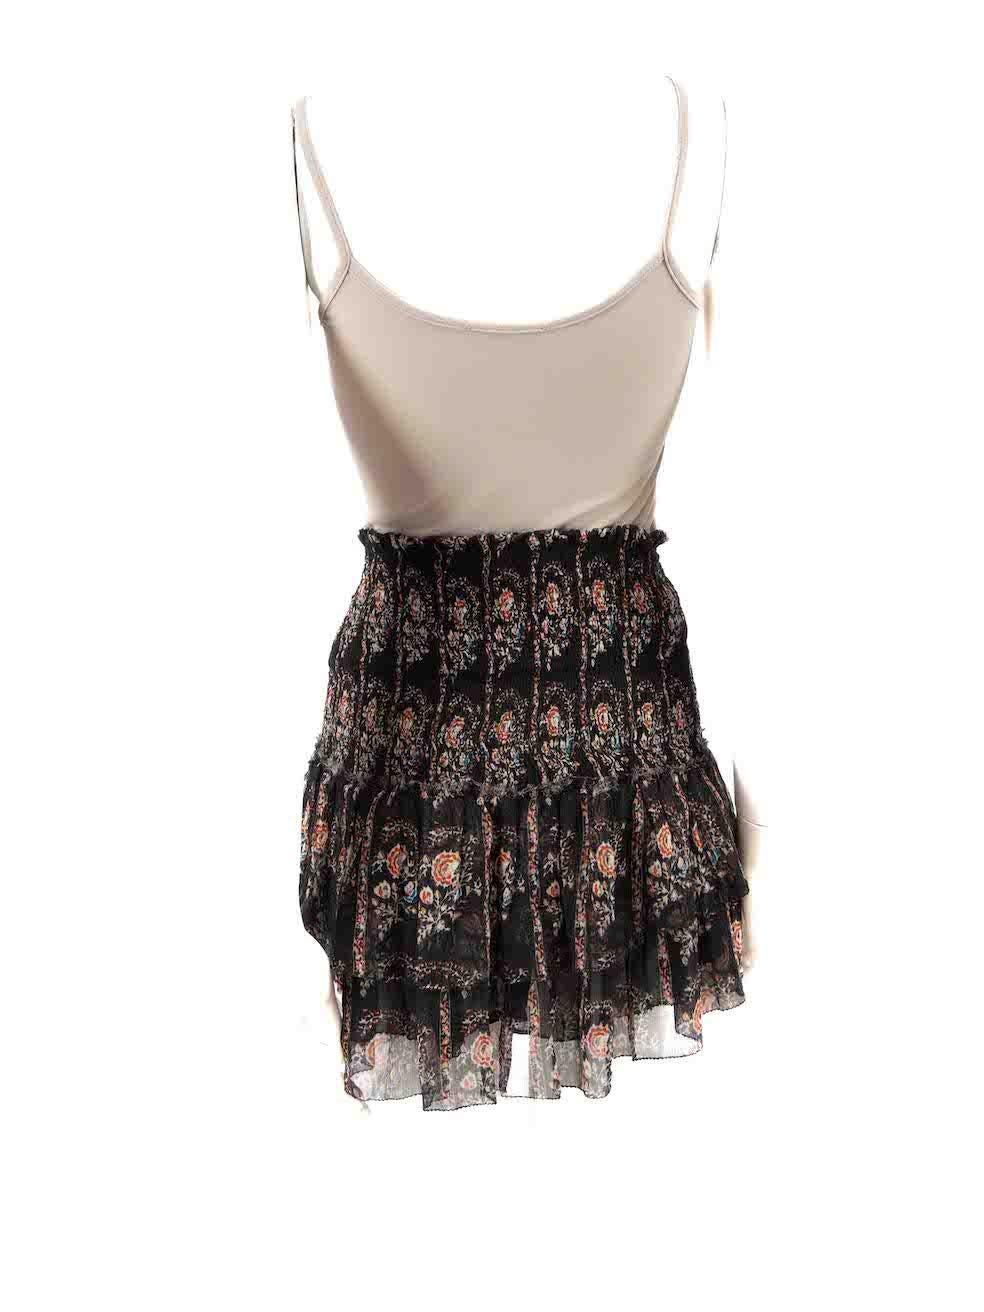 Isabel Marant Isabel Marant Étoile Black Silk Floral Layered Skirt Size XL In Good Condition For Sale In London, GB